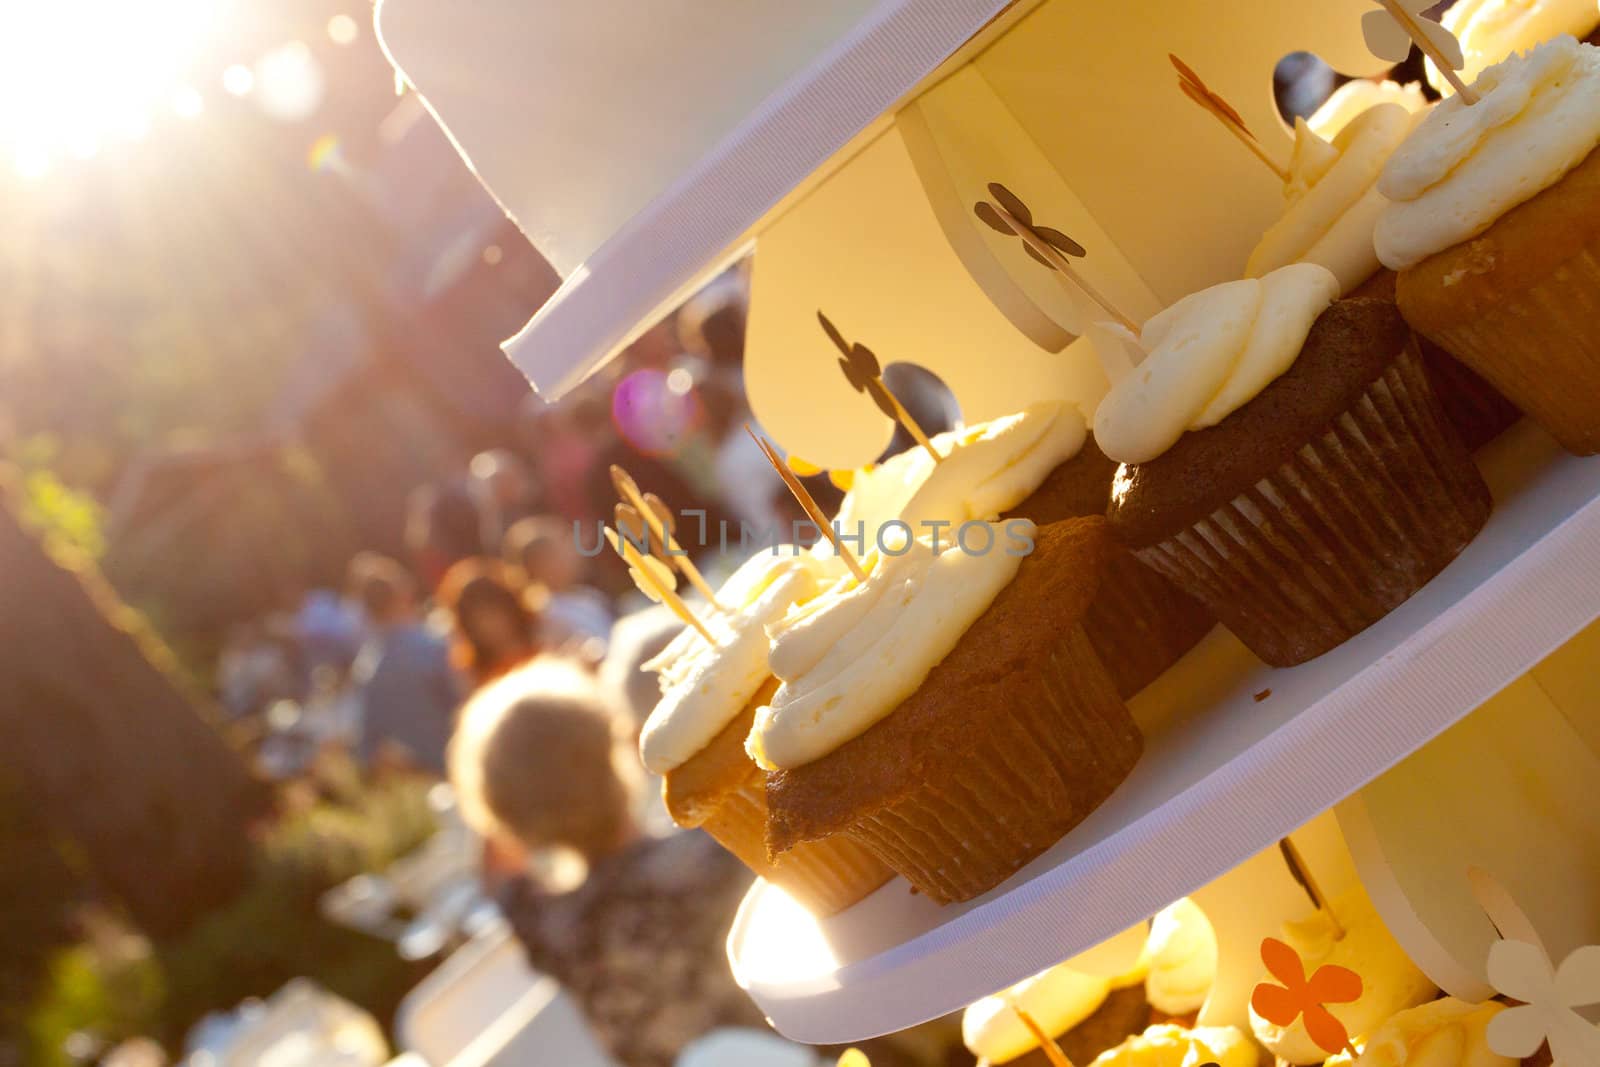 Three types of wedding cupcakes at a dessert recepition outdoors.